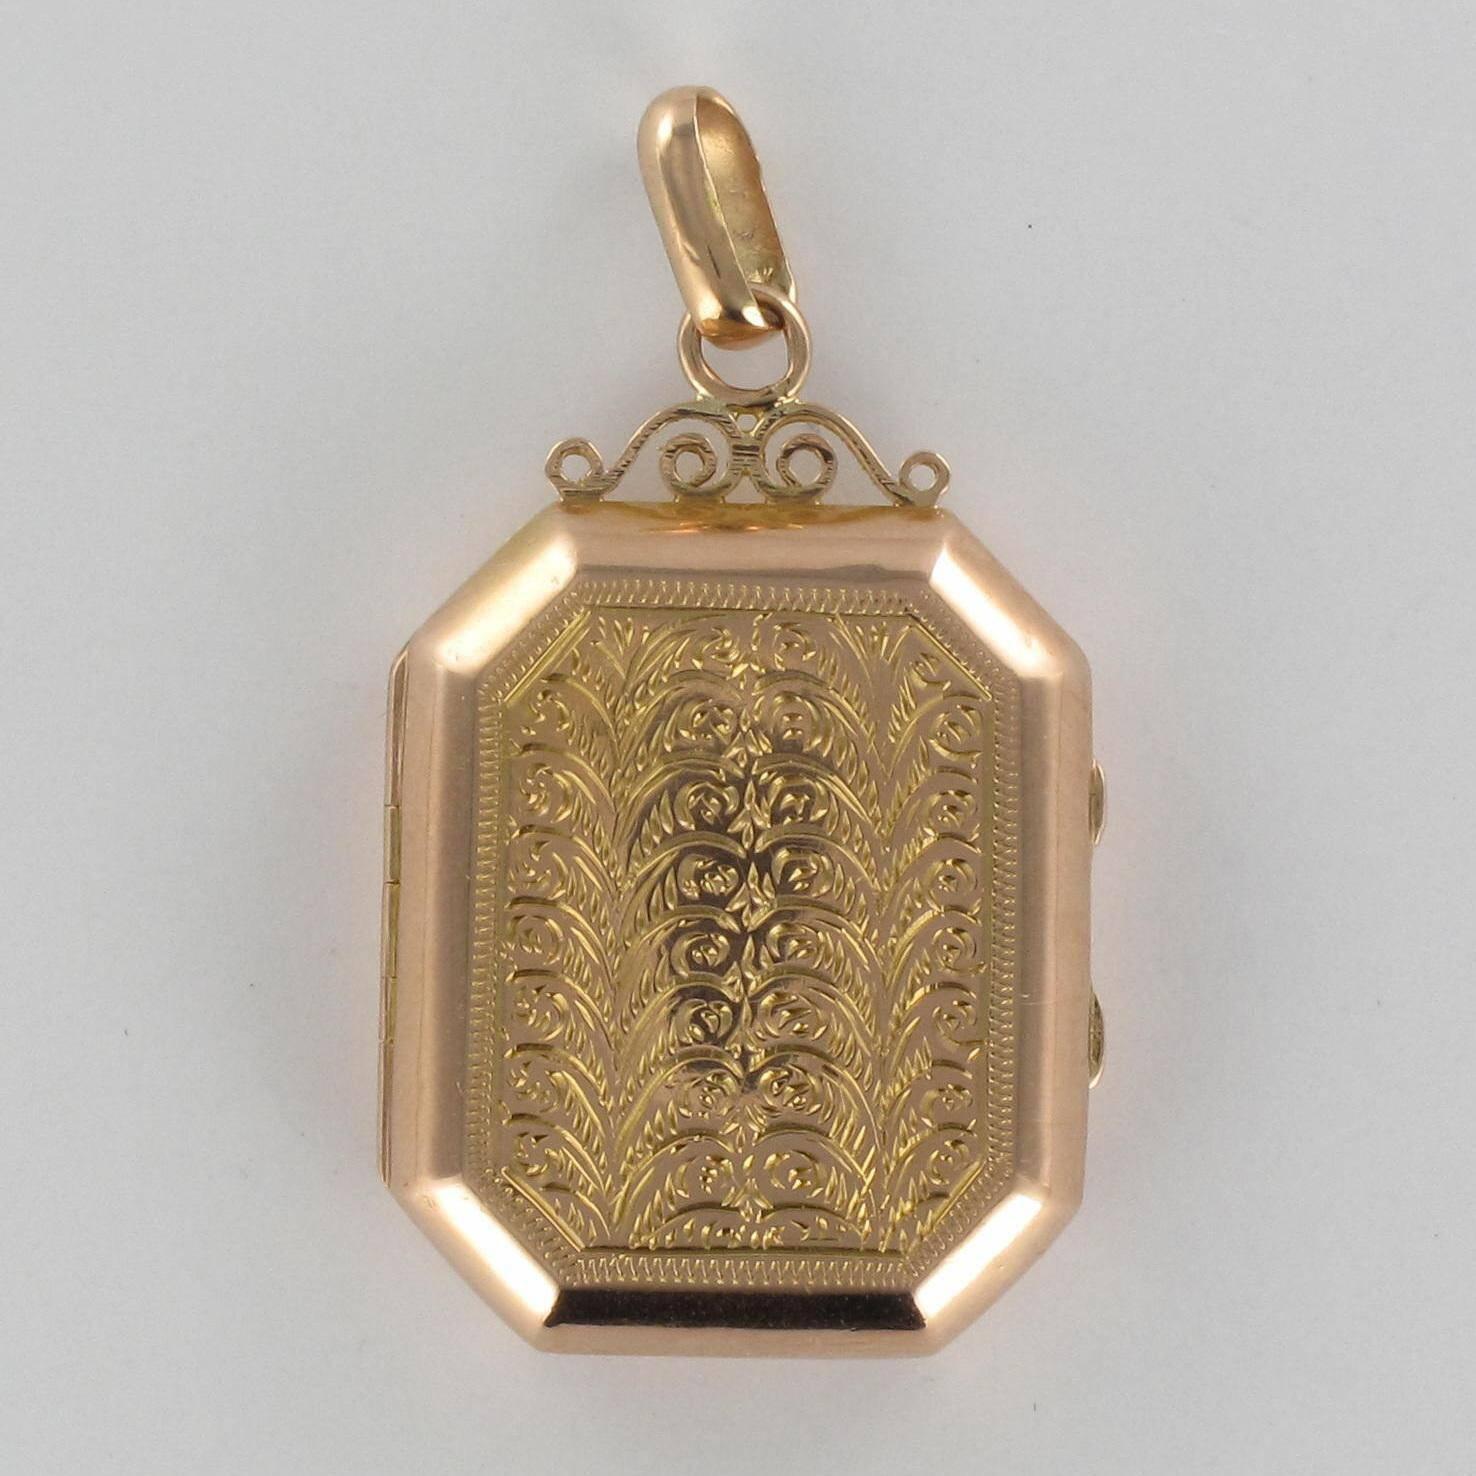 Antique French Engraved Gold Locket Pendant For Sale at 1stdibs